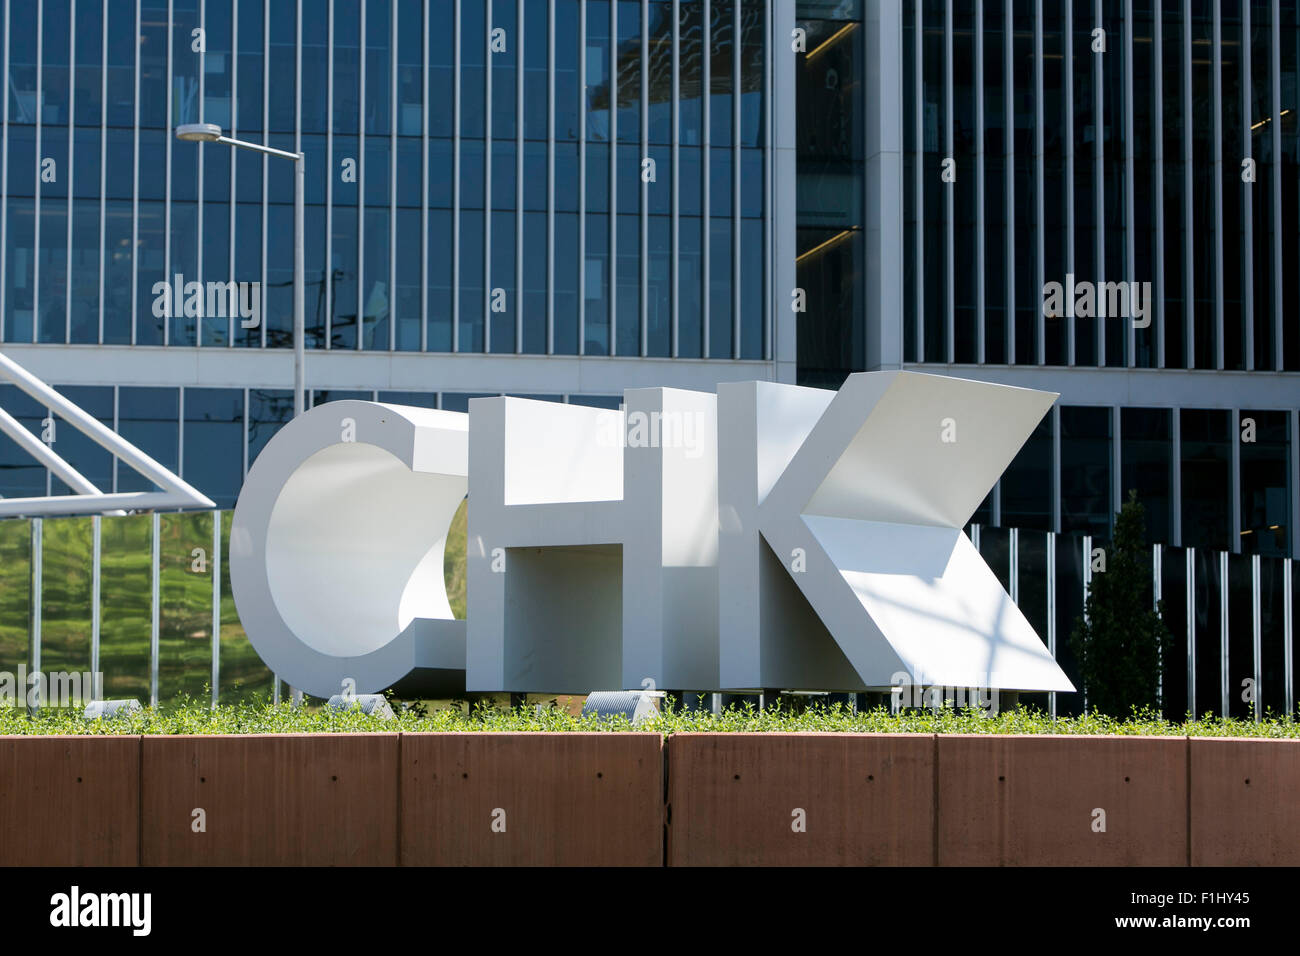 A logo sign outside of the headquarters of the Chesapeake Energy Corporation, in Oklahoma City, Oklahoma, on August 20, 2015. Stock Photo